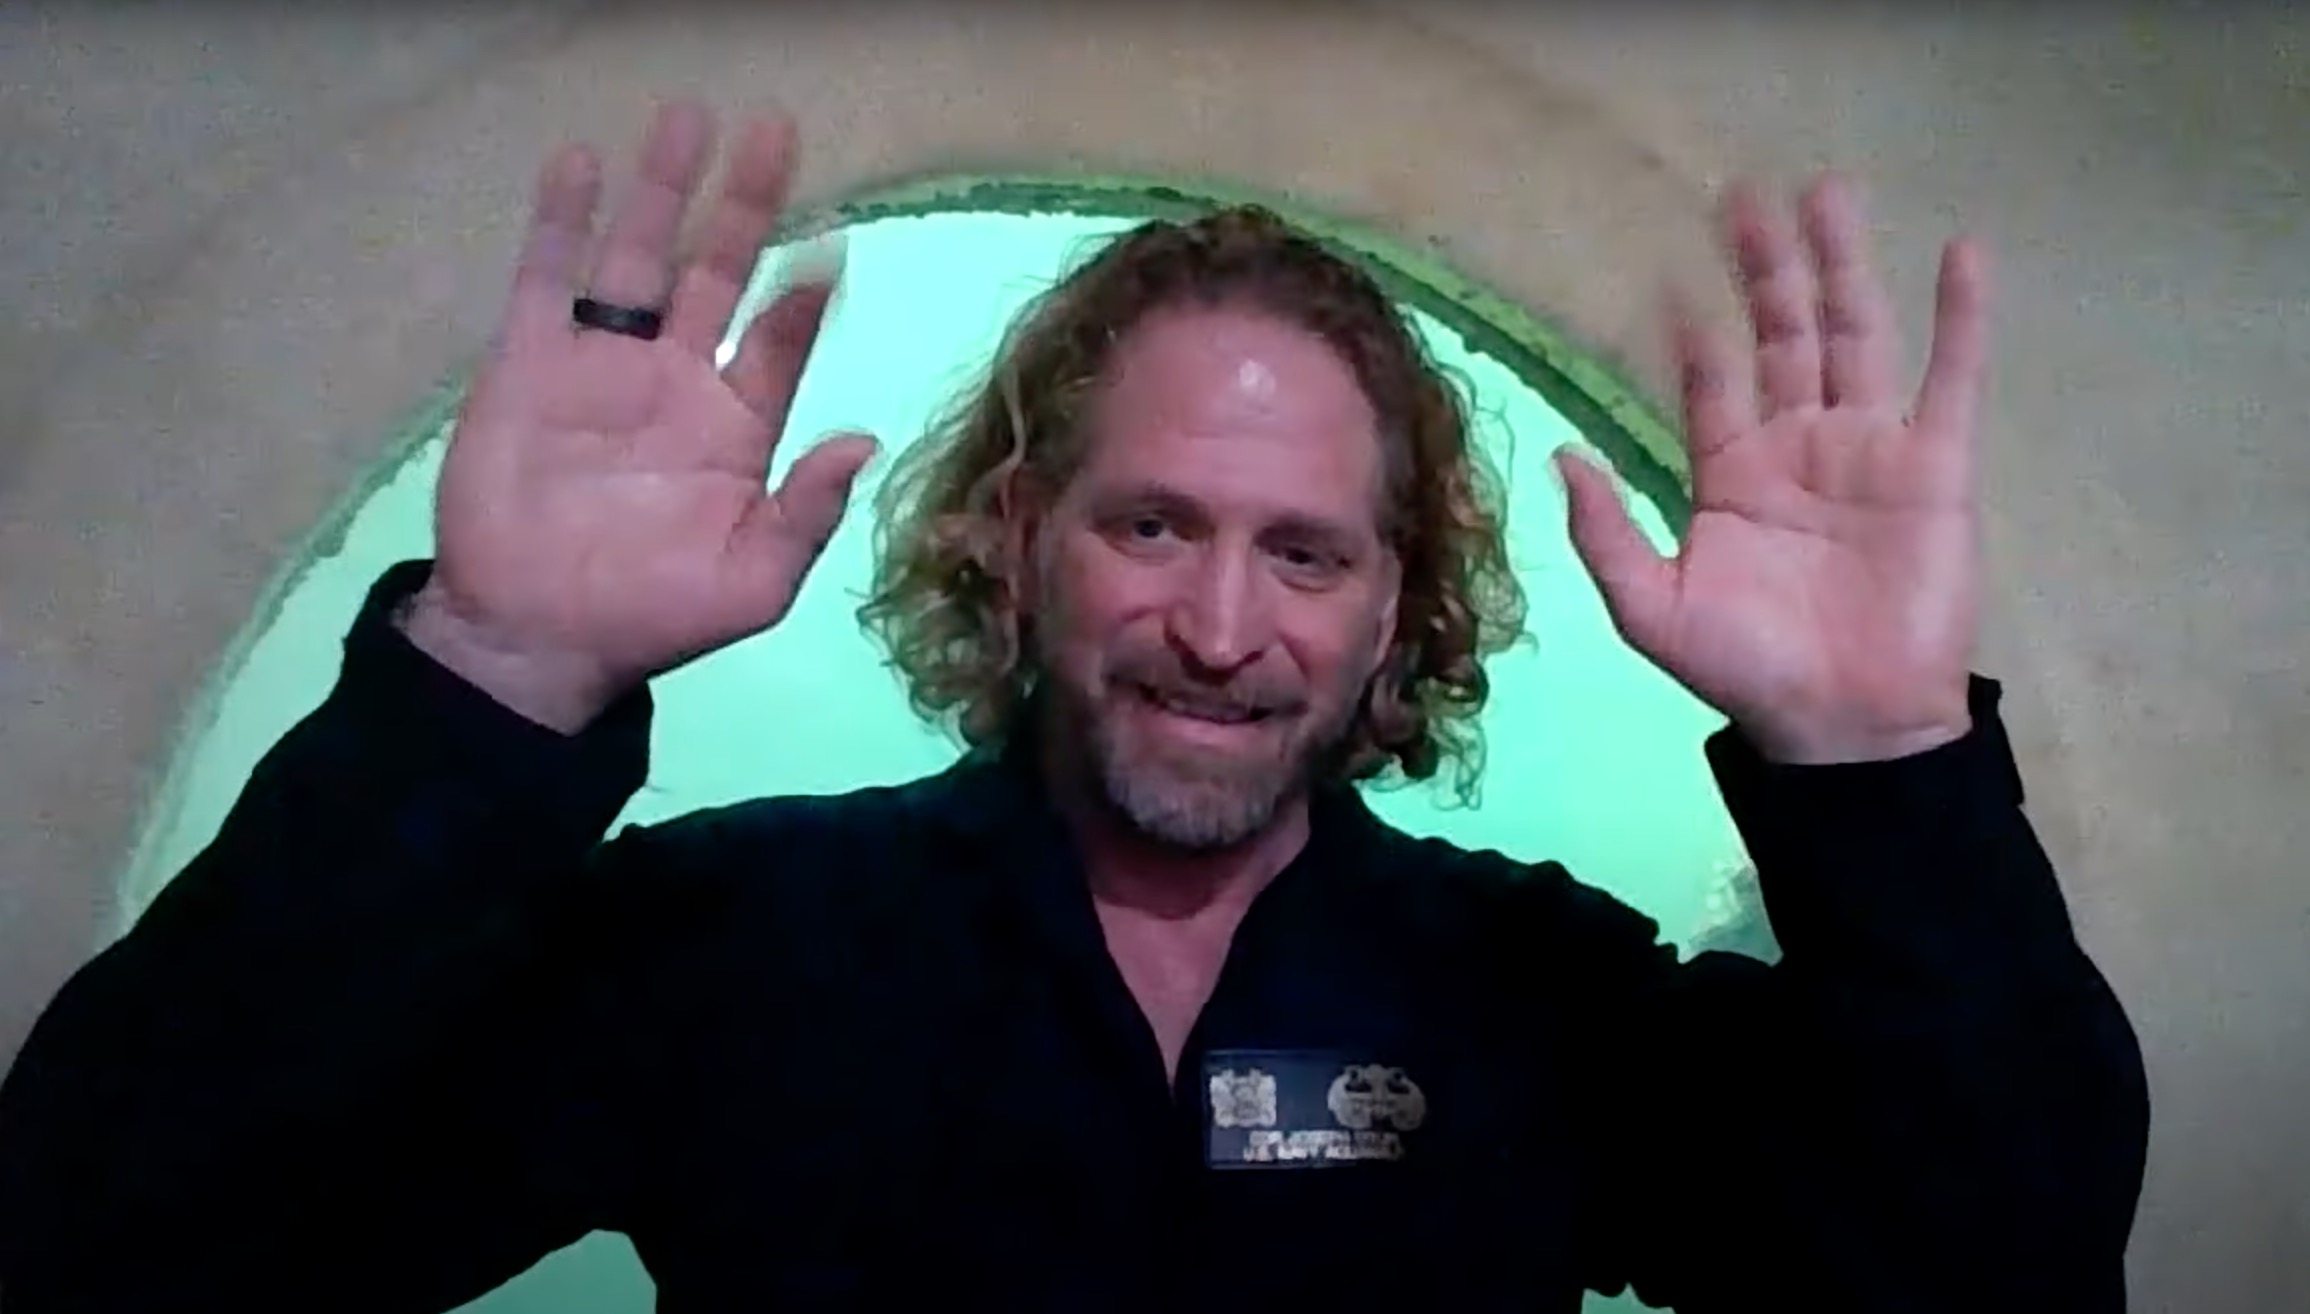 Joseph Duturi, or Dr Deep Sea, is on a record-breaking mission to live underwater for 100 days, to understand the body’s limits and inspire children to get into science. Photo: Youtube/University of South Florida